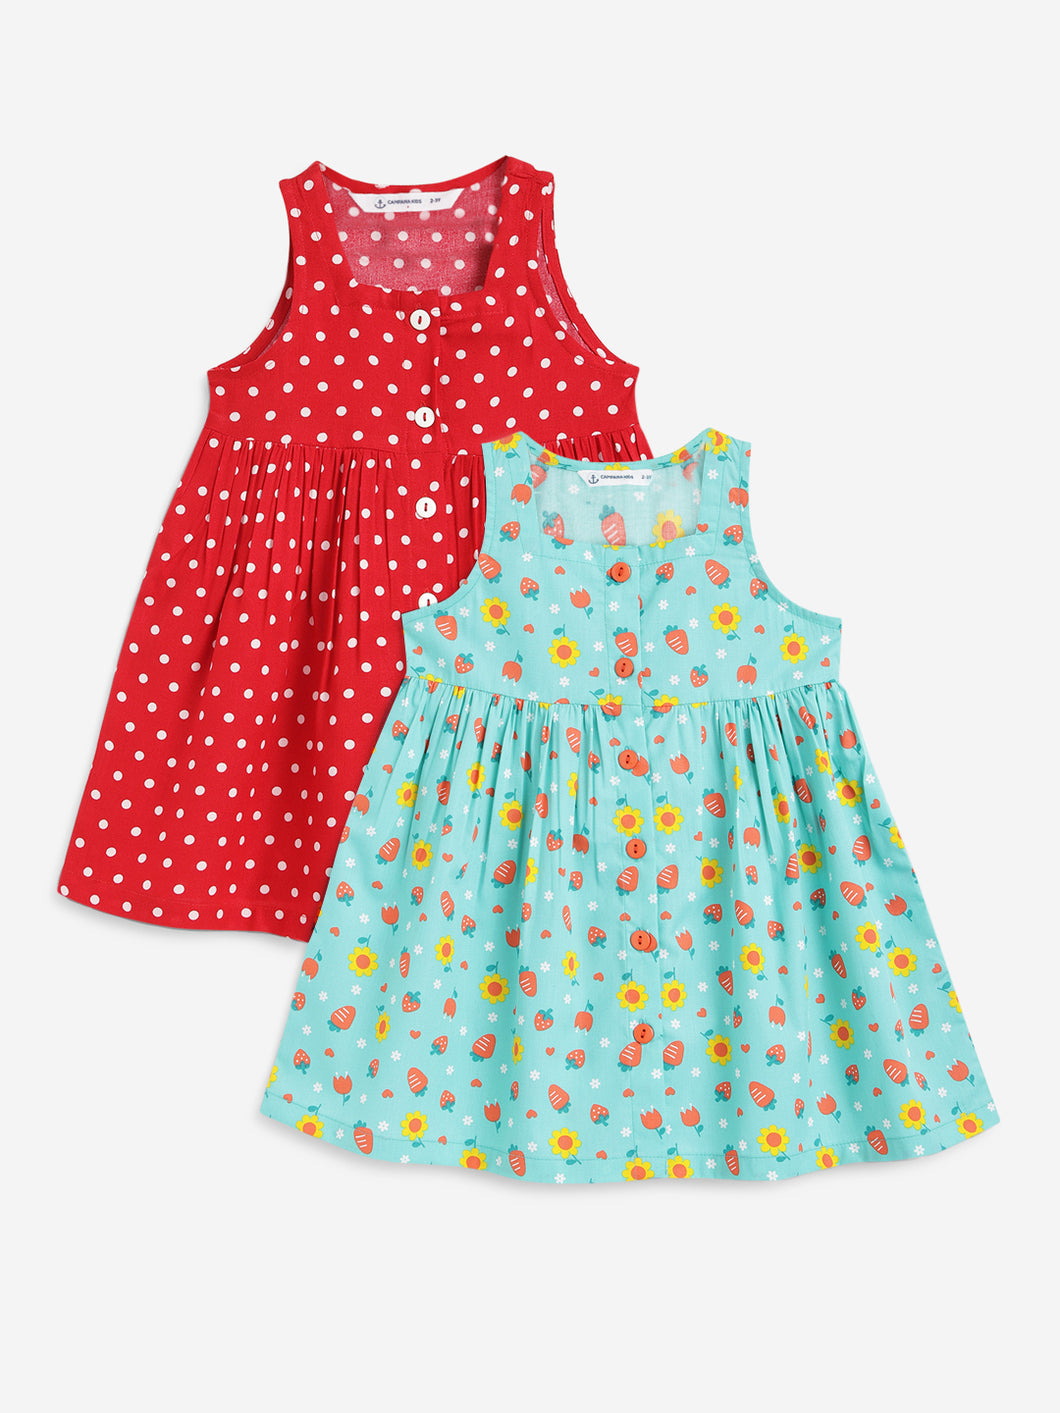 Campana Girls Amy Pack of Two Dresses - Floral & Dots Print - Red & Turquoise Blue